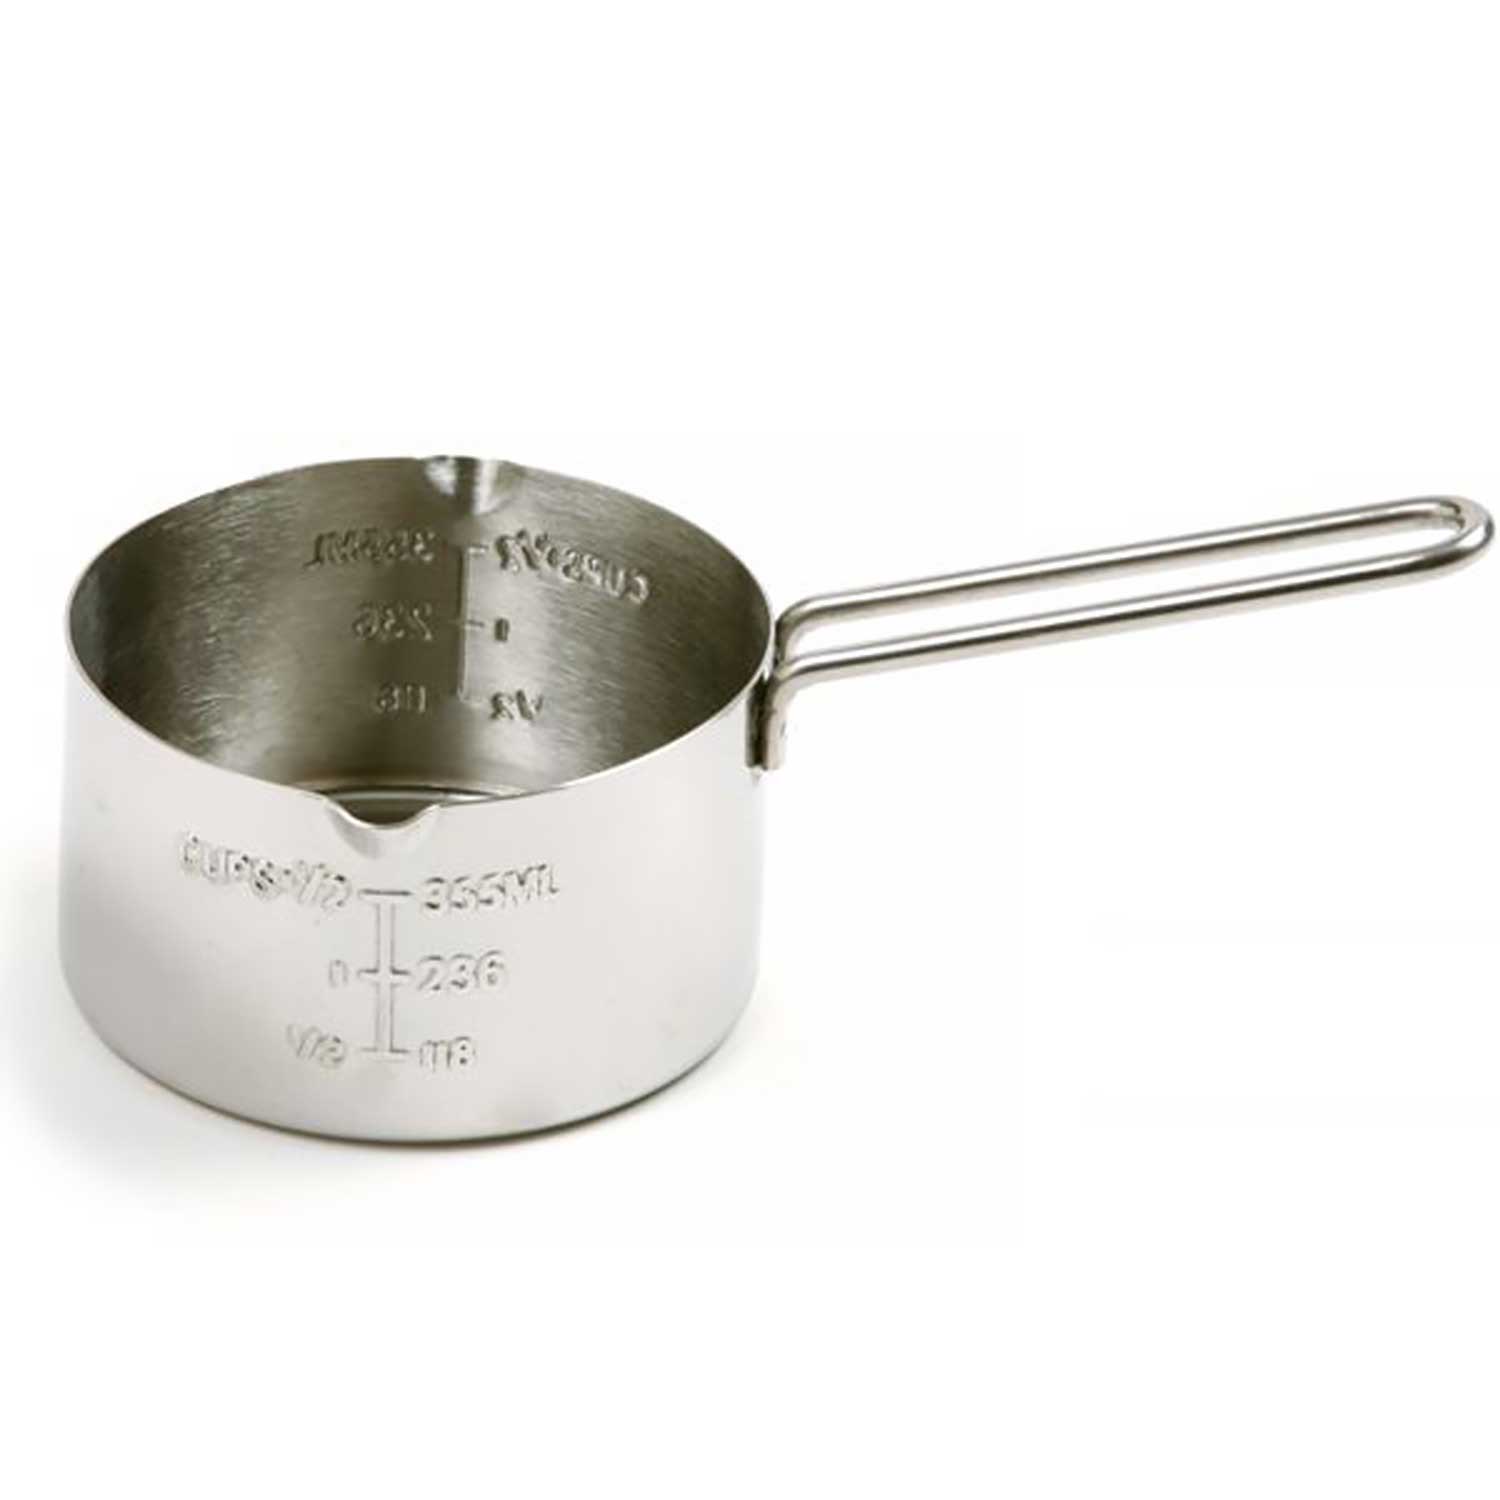 stainless-steel-measuring-cup-2-cup-n-3058-country-kitchen-sweetart